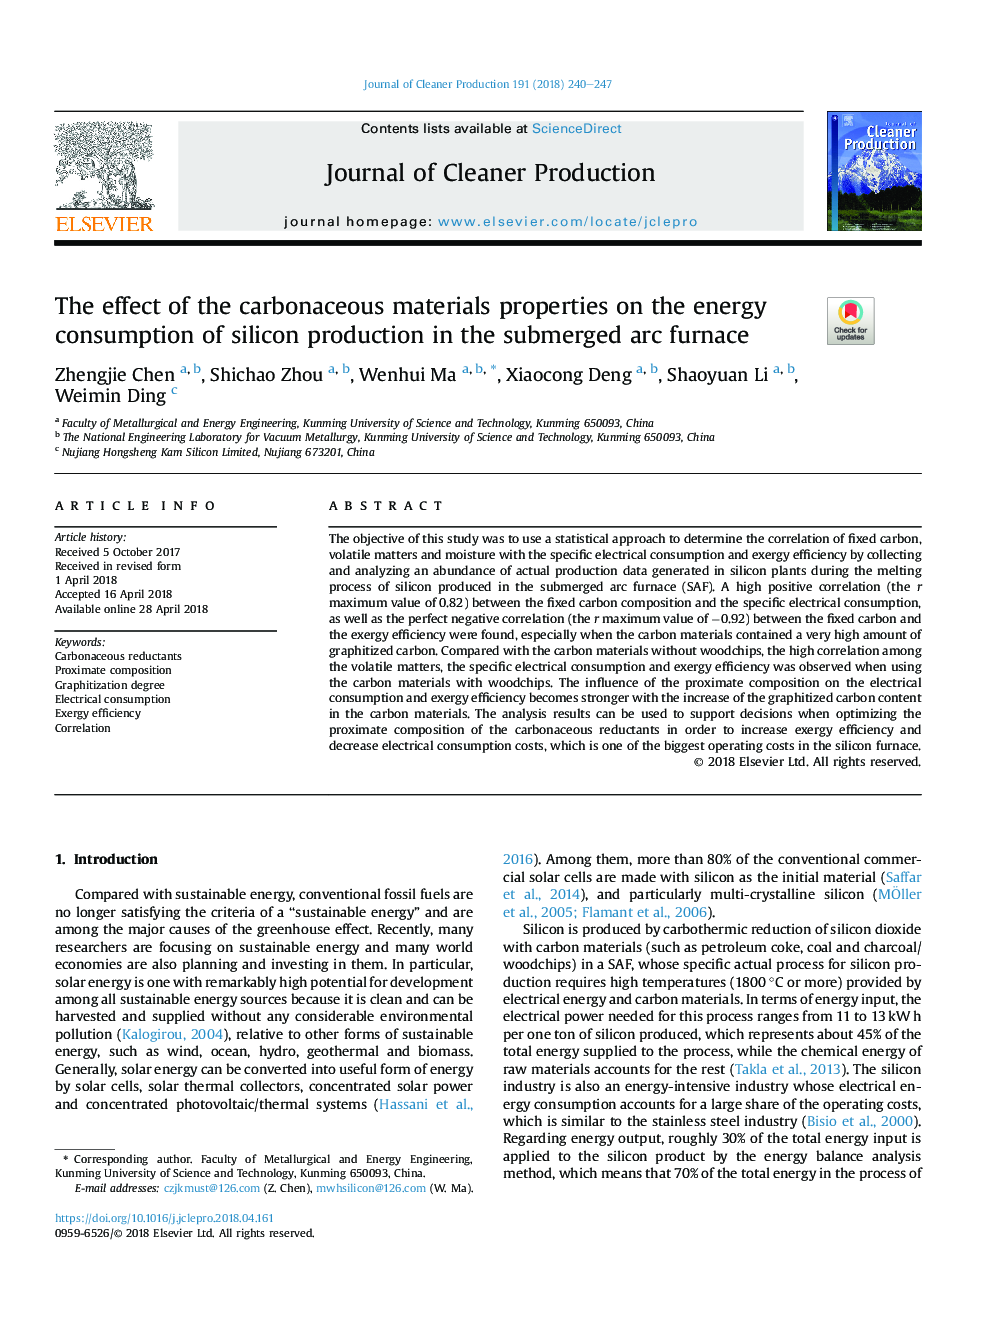 The effect of the carbonaceous materials properties on the energy consumption of silicon production in the submerged arc furnace